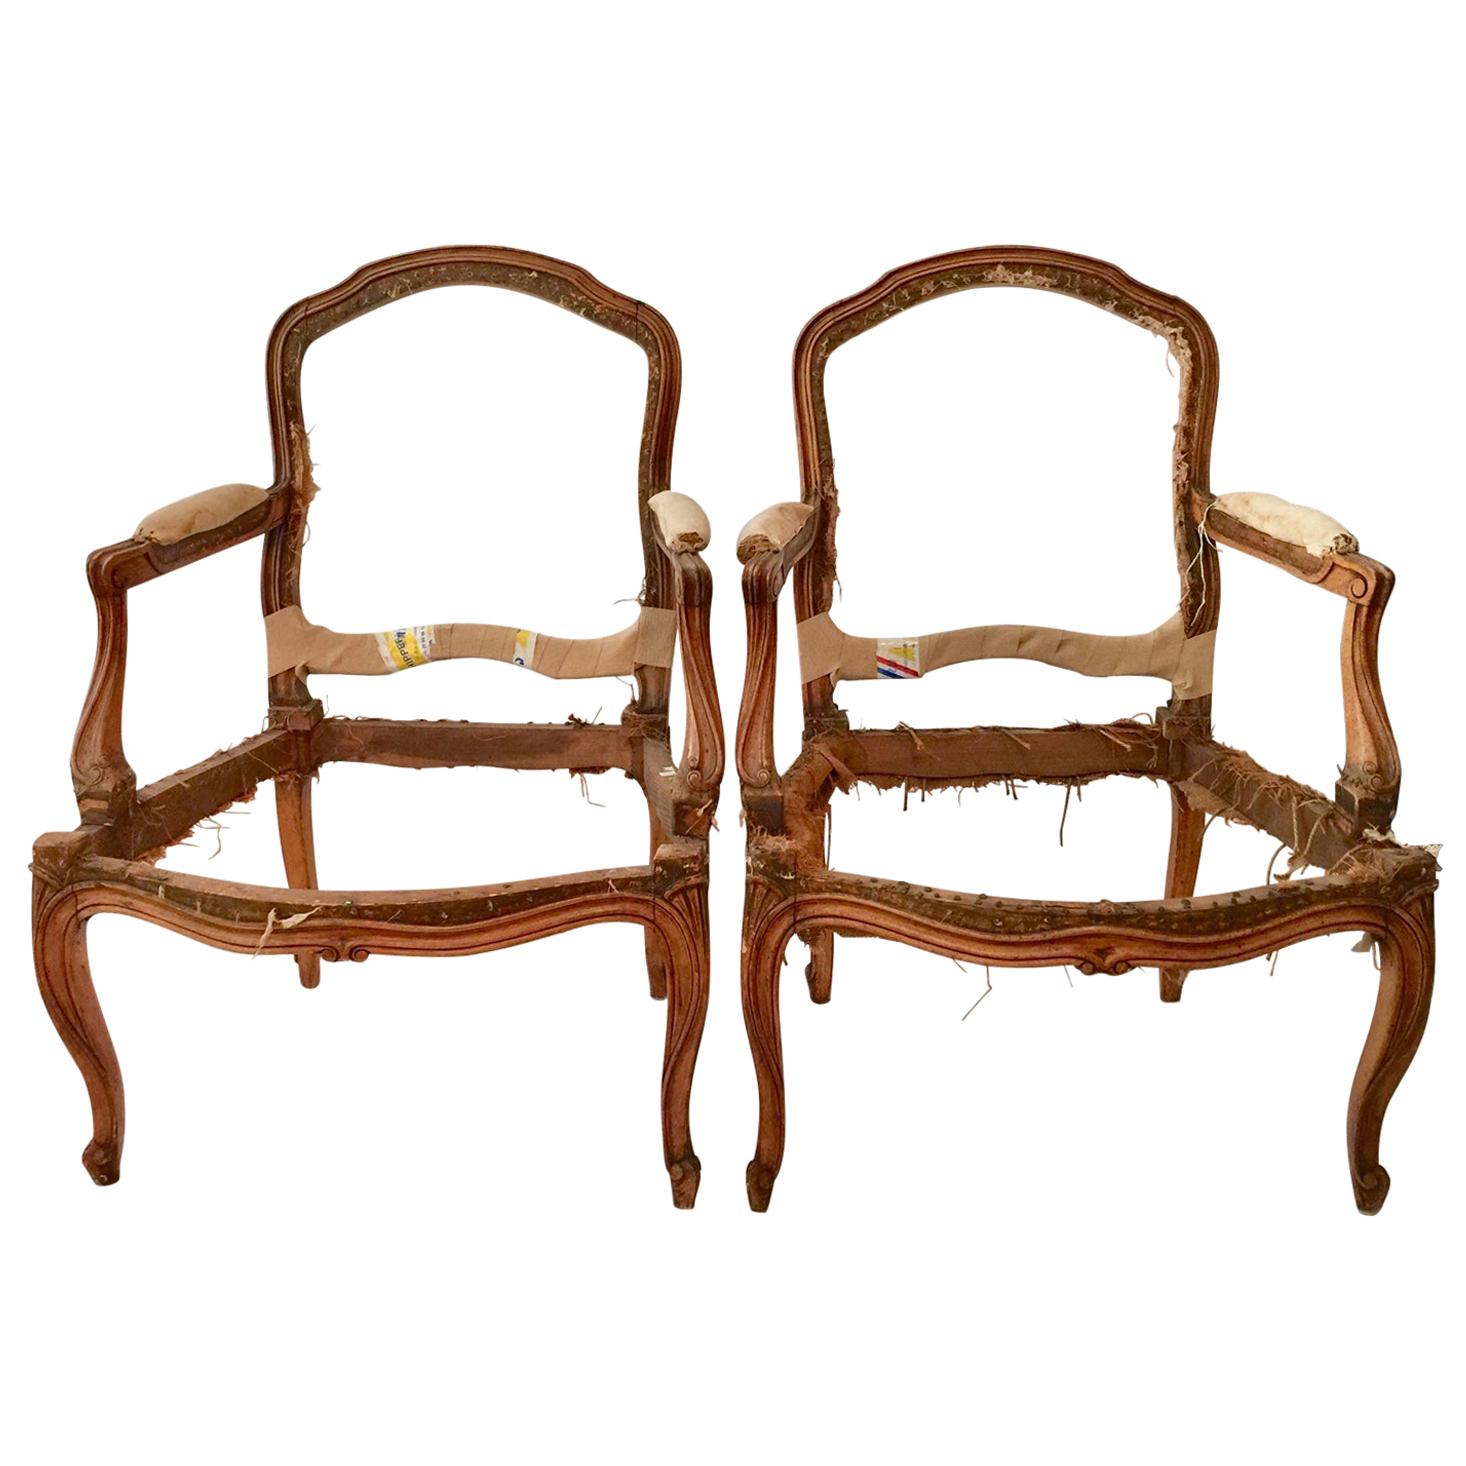 French Pair of Armchair Carcasses, Montespan Style, 19th Century